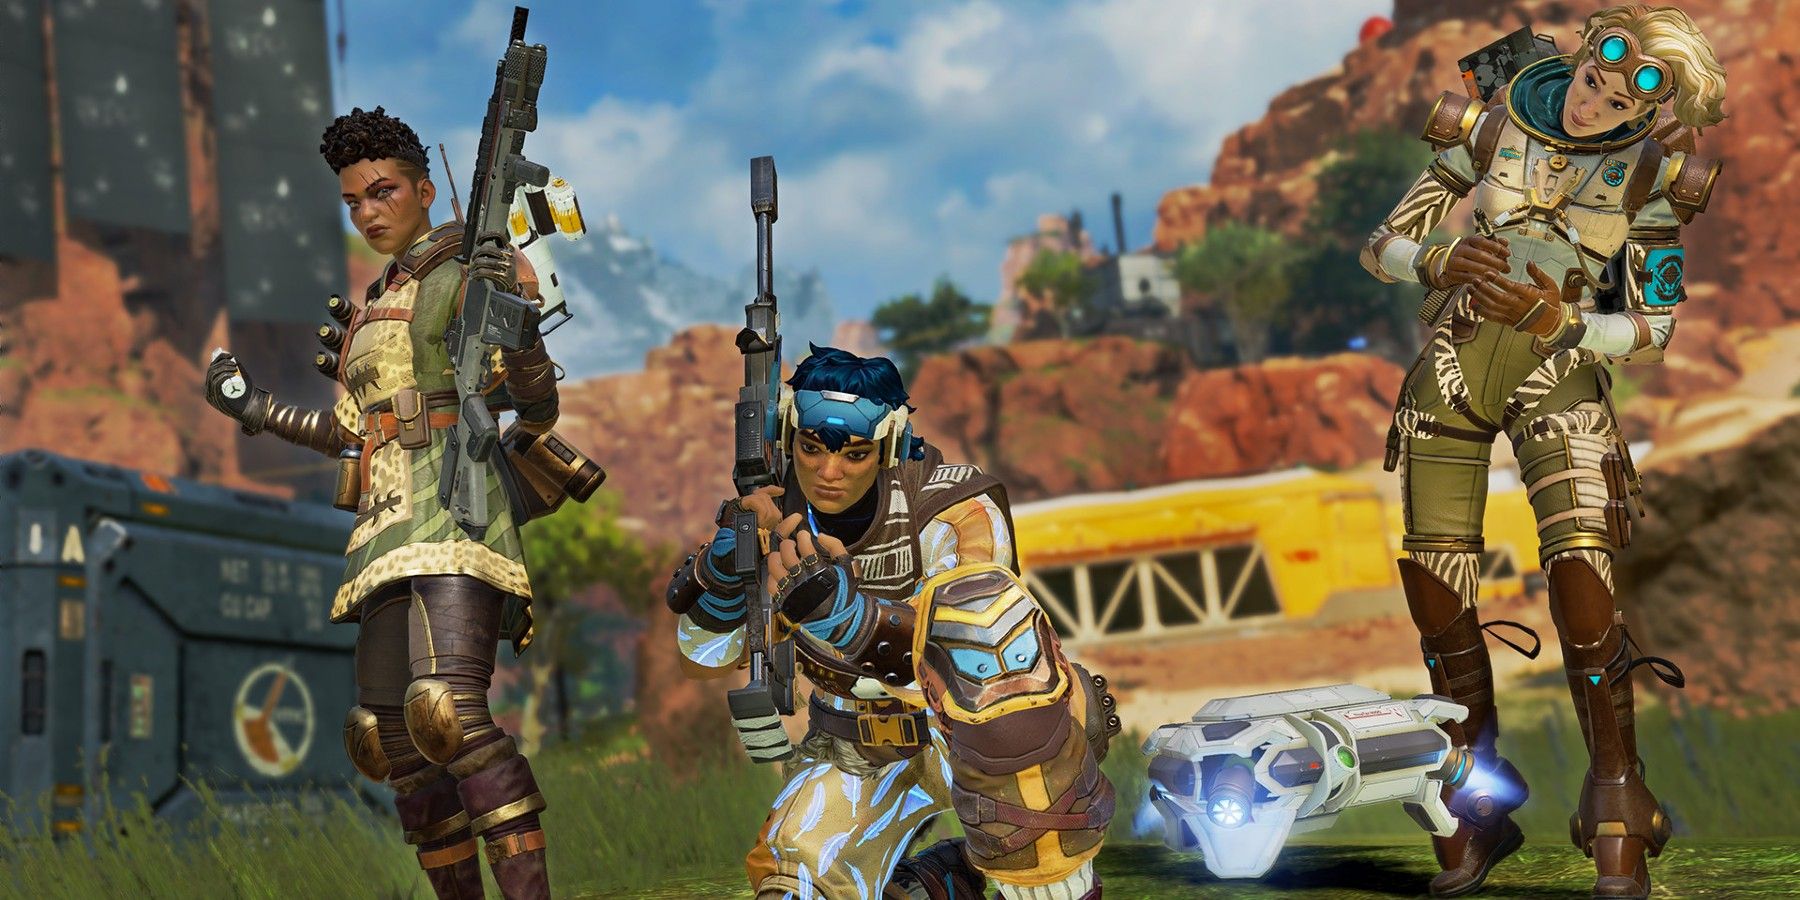 Apex Legends Dev Reveals Why Weapons Aren’t Designed Exclusively for Care Package